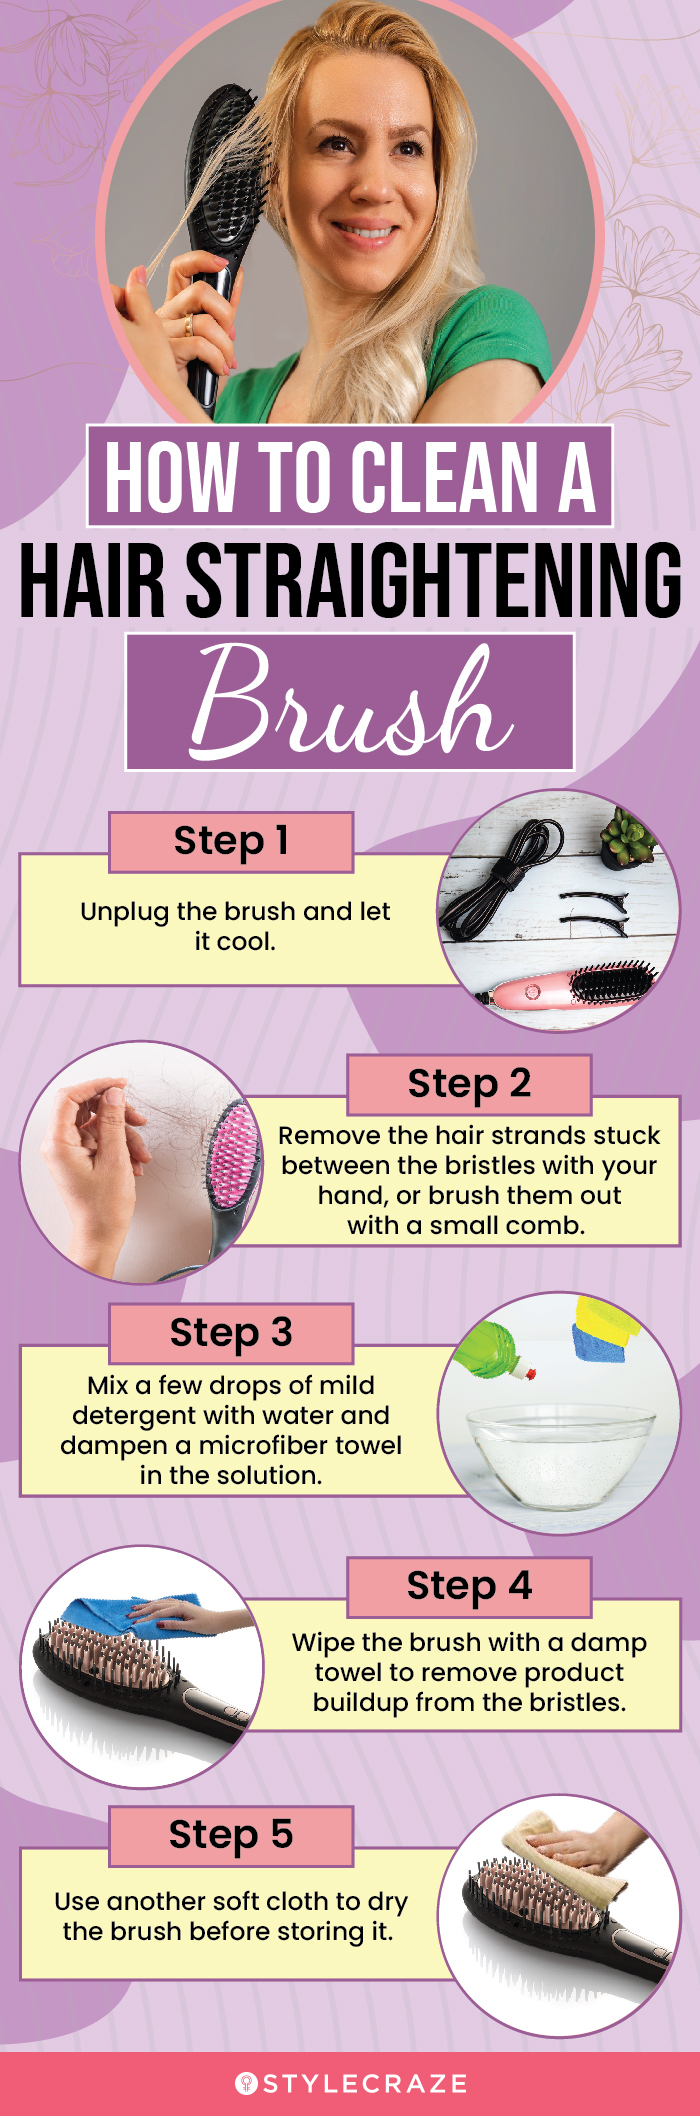 Tips To Clean A Hair Straightening Brush: Steps To Follow [infographic]